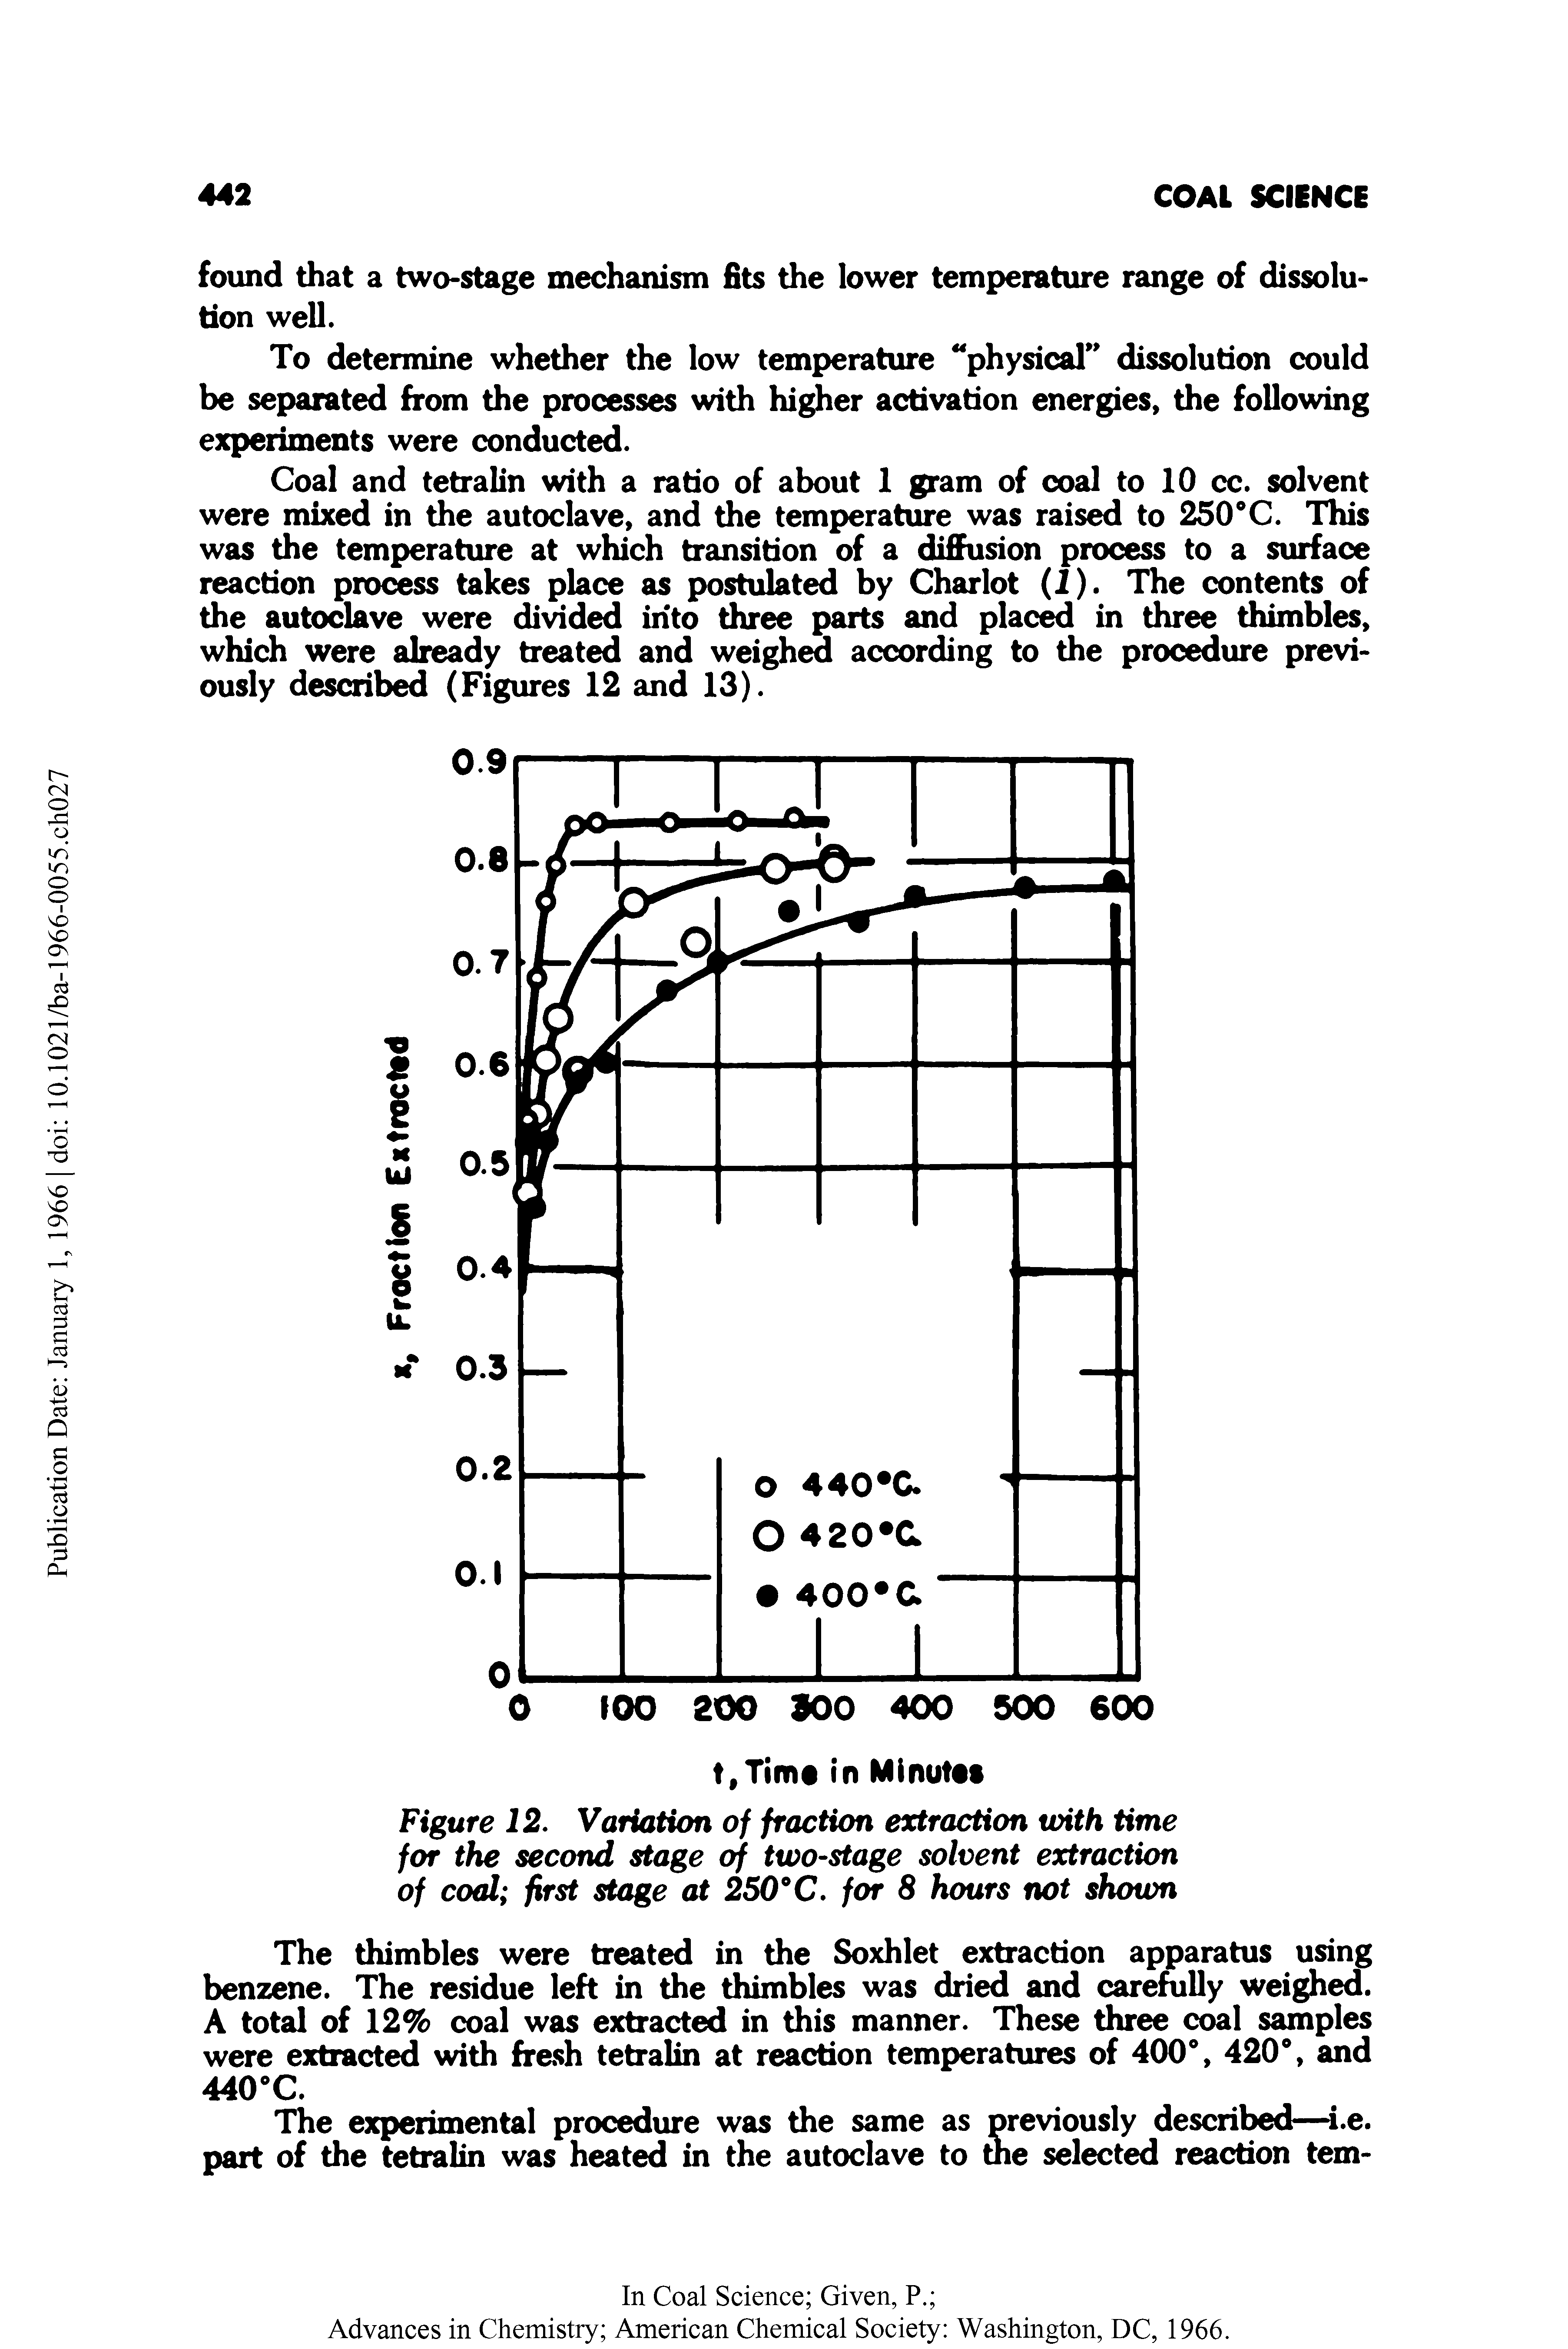 Figure 12. Variation of fraction extraction with time for the second stage of two-stage solvent extraction of coal first stage at 250°C. for 8 hours not shown...